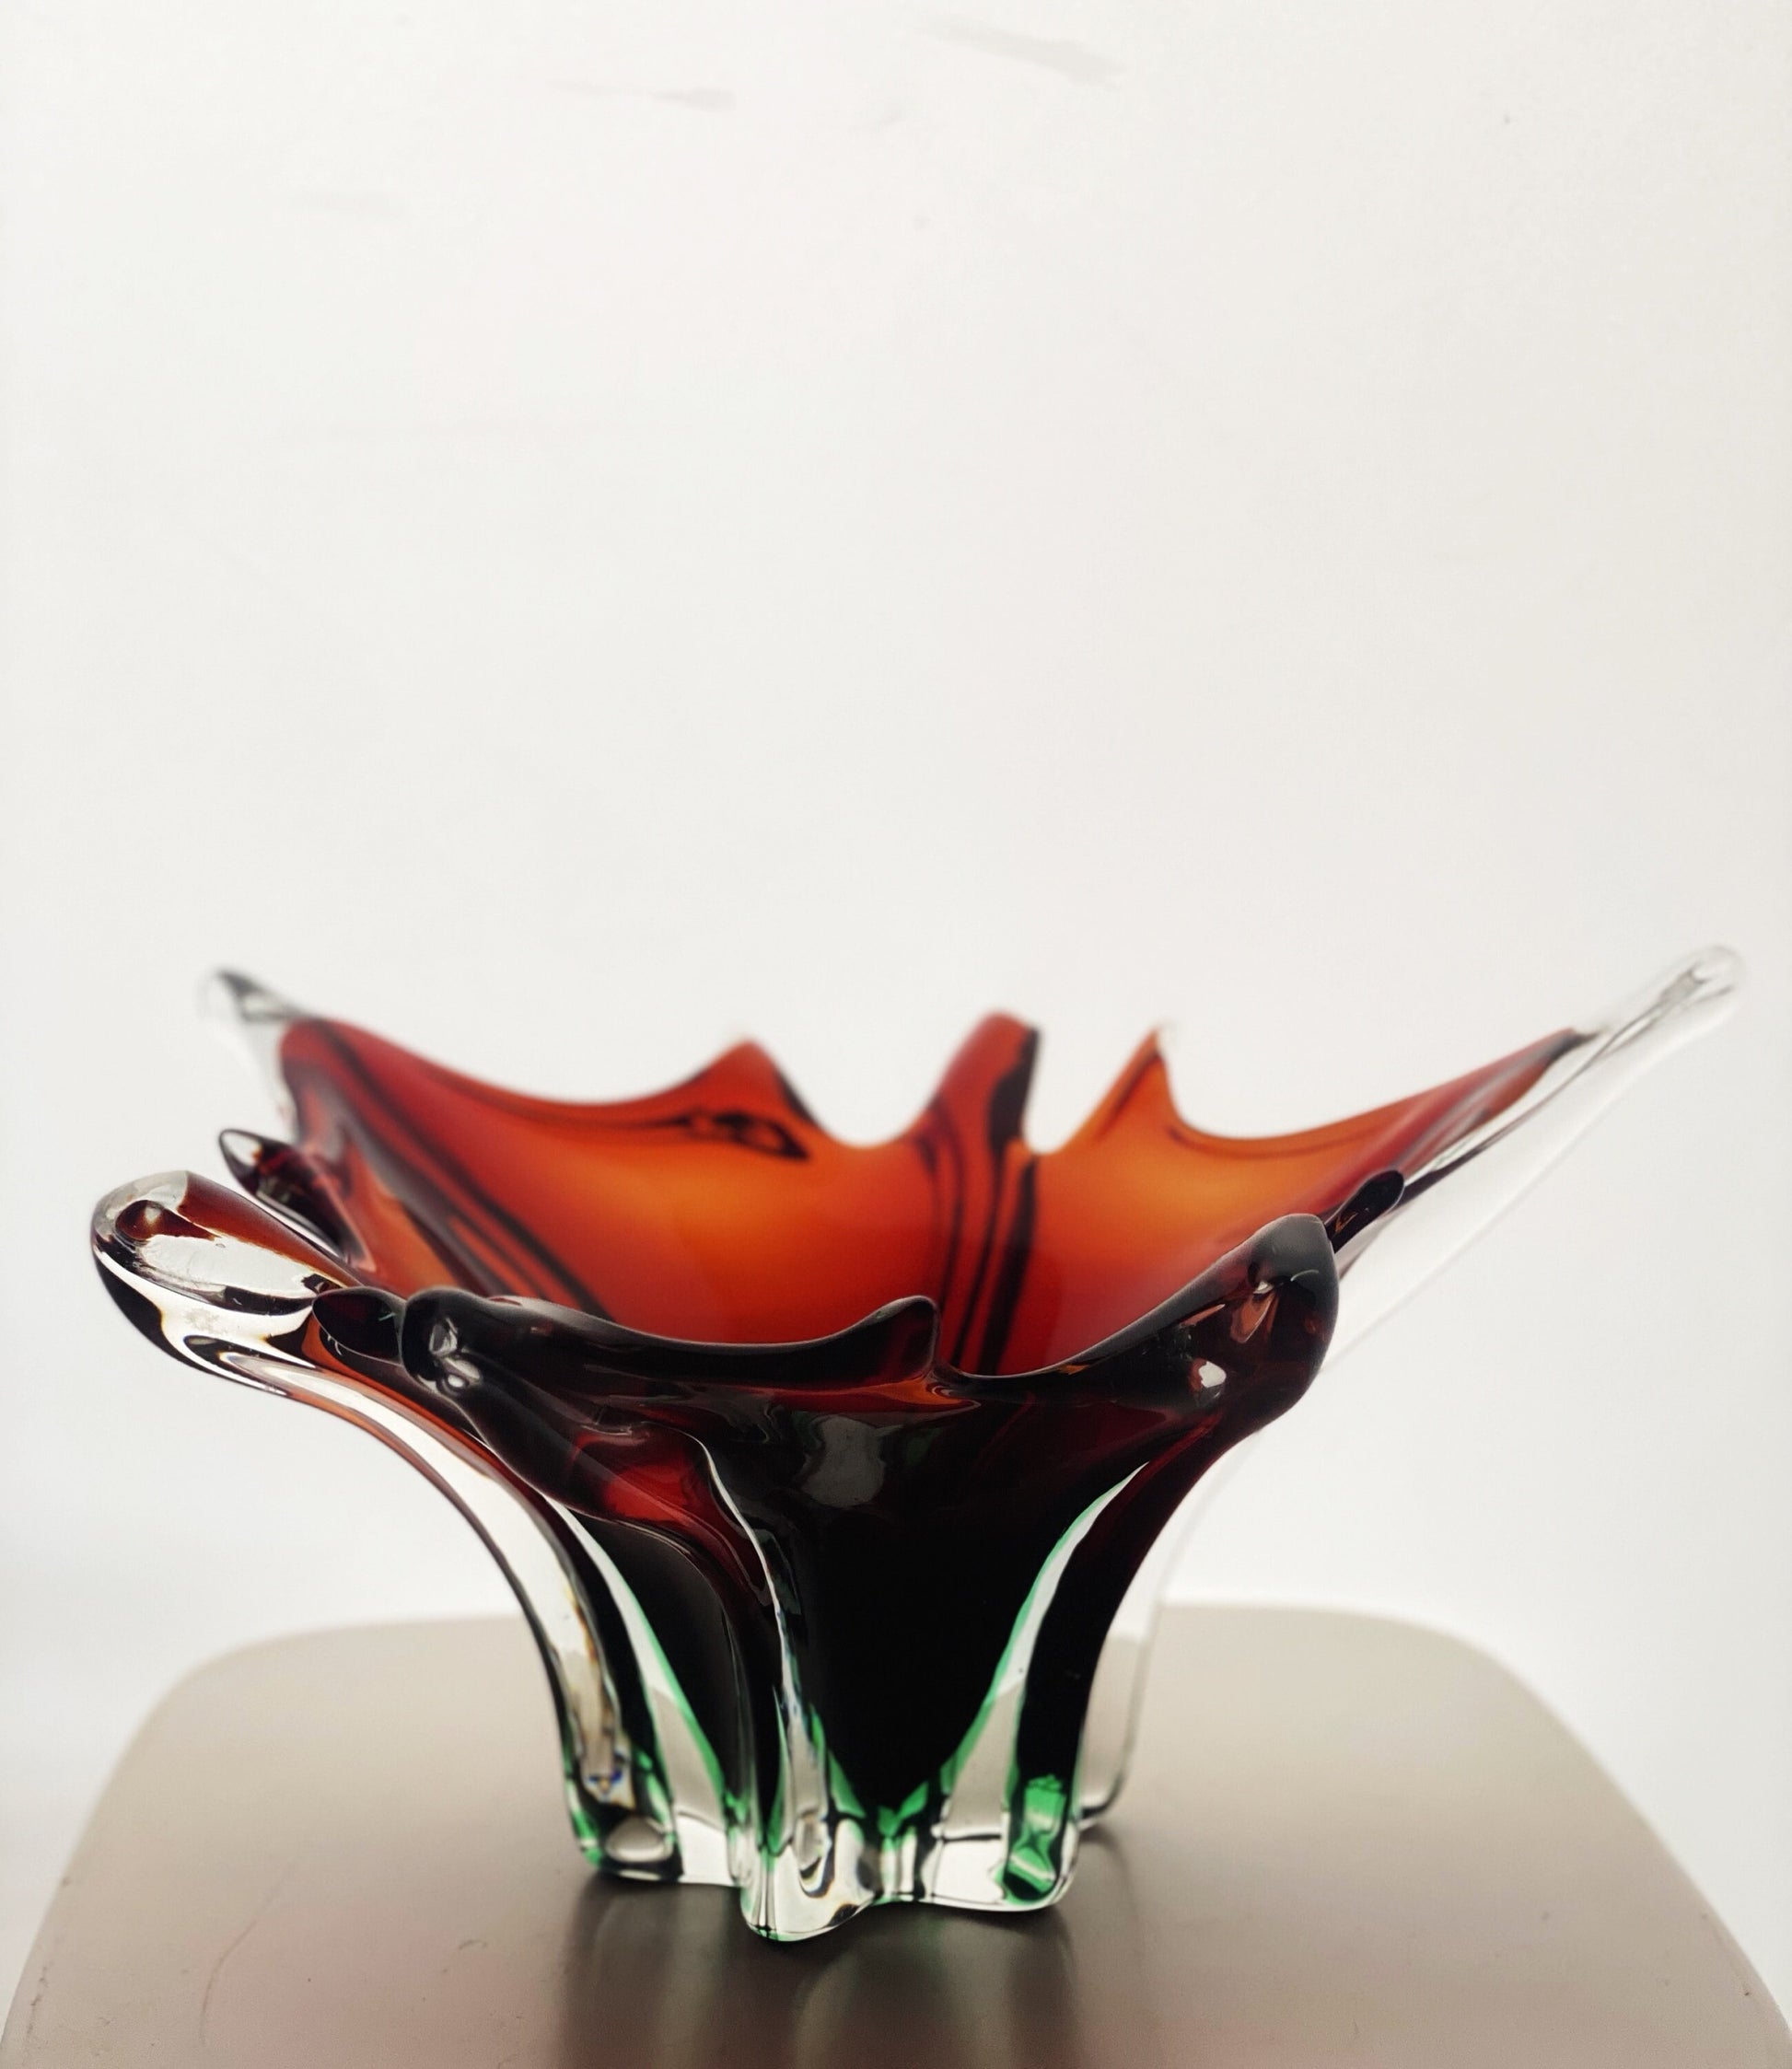 Large Murano Midcentury Bowl in Warm Chocolate Amber with Bright Highlights 1960s